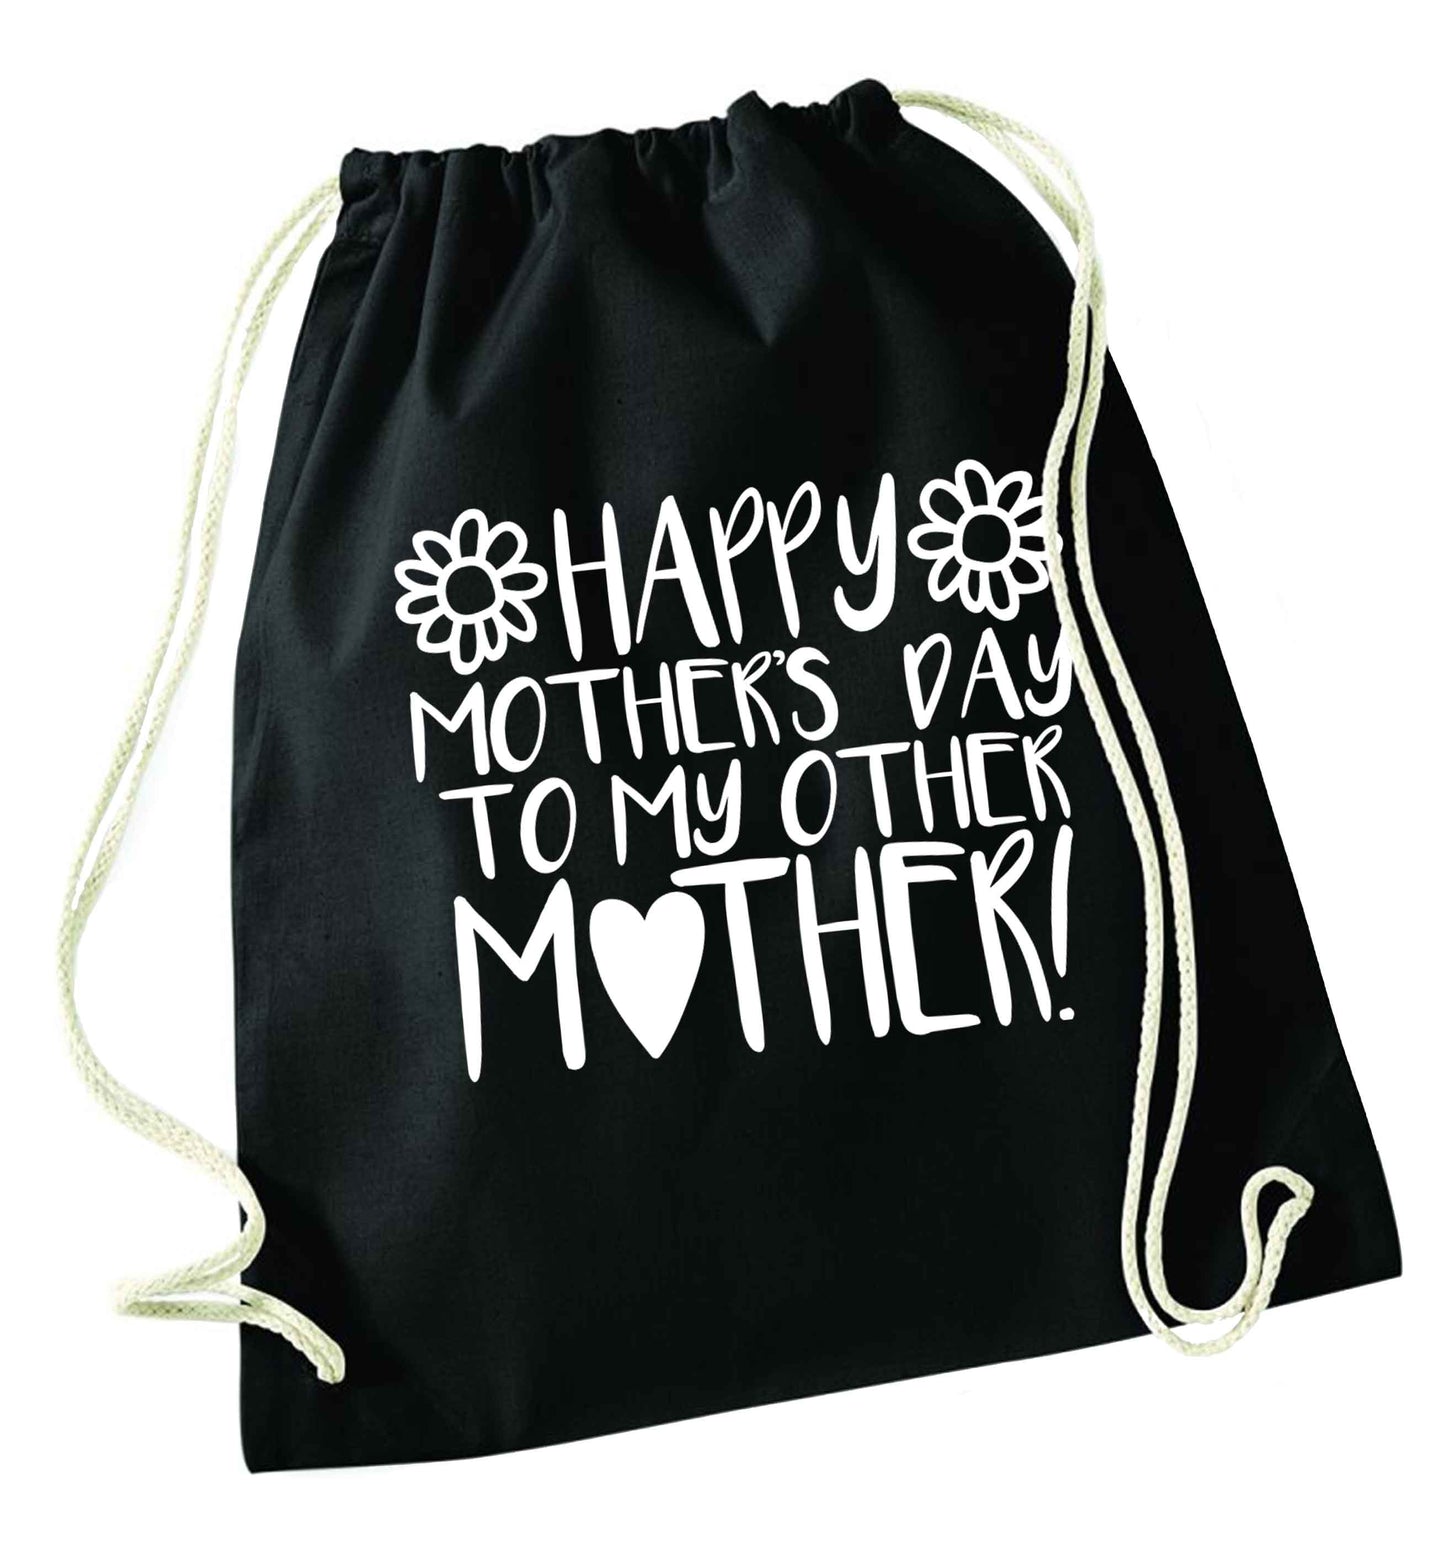 Happy mother's day to my other mother black drawstring bag